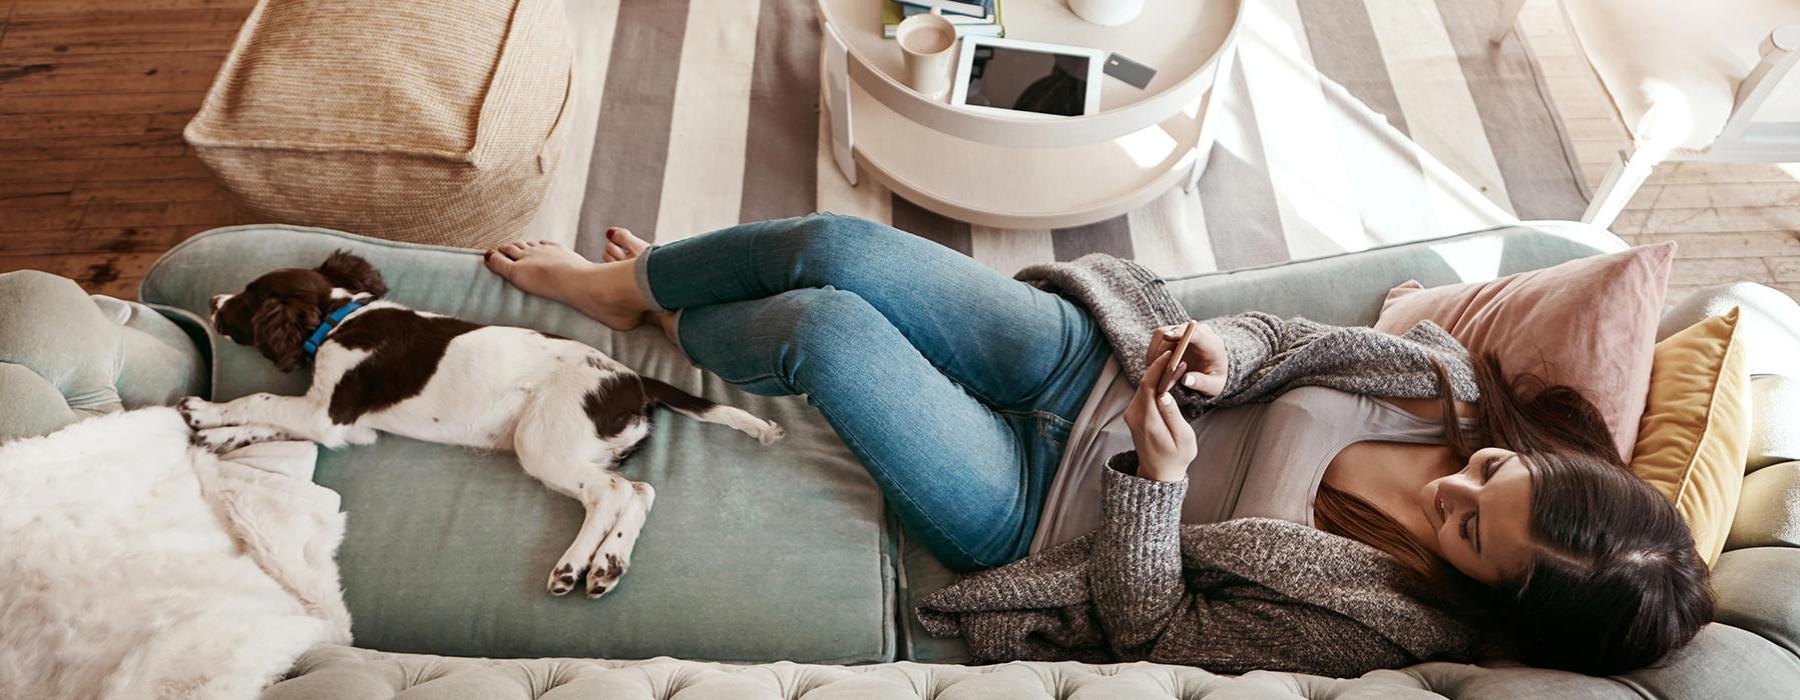 woman looks at phone while lying on a couch with her dog